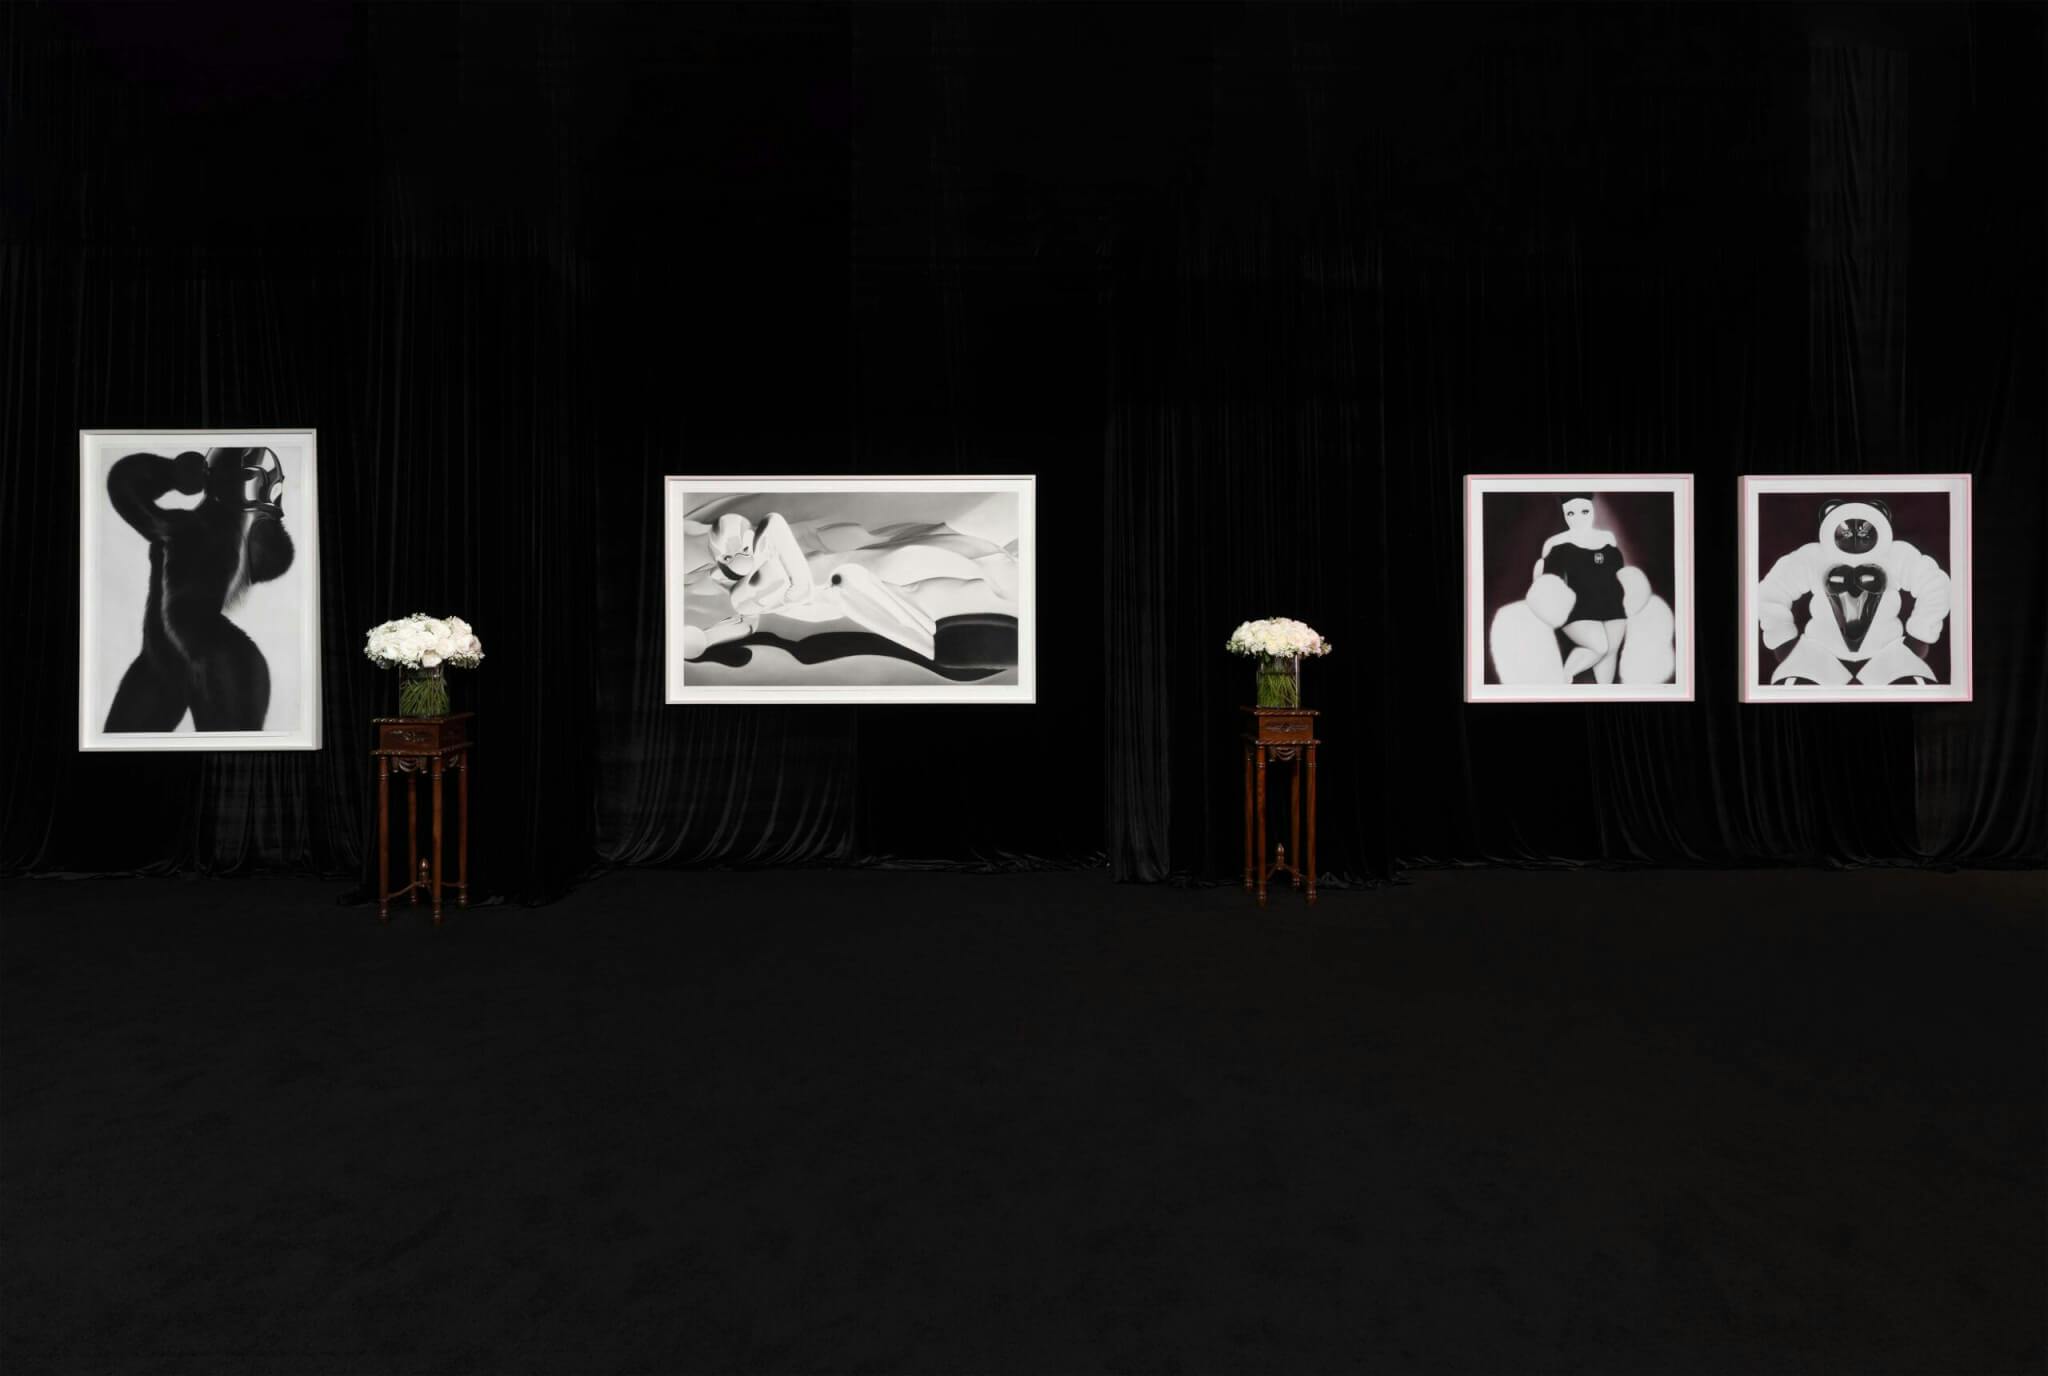 Black and white images by Katrina Pisetti and Josh Allen, set against a black background, with stands bearing white flowers in between.